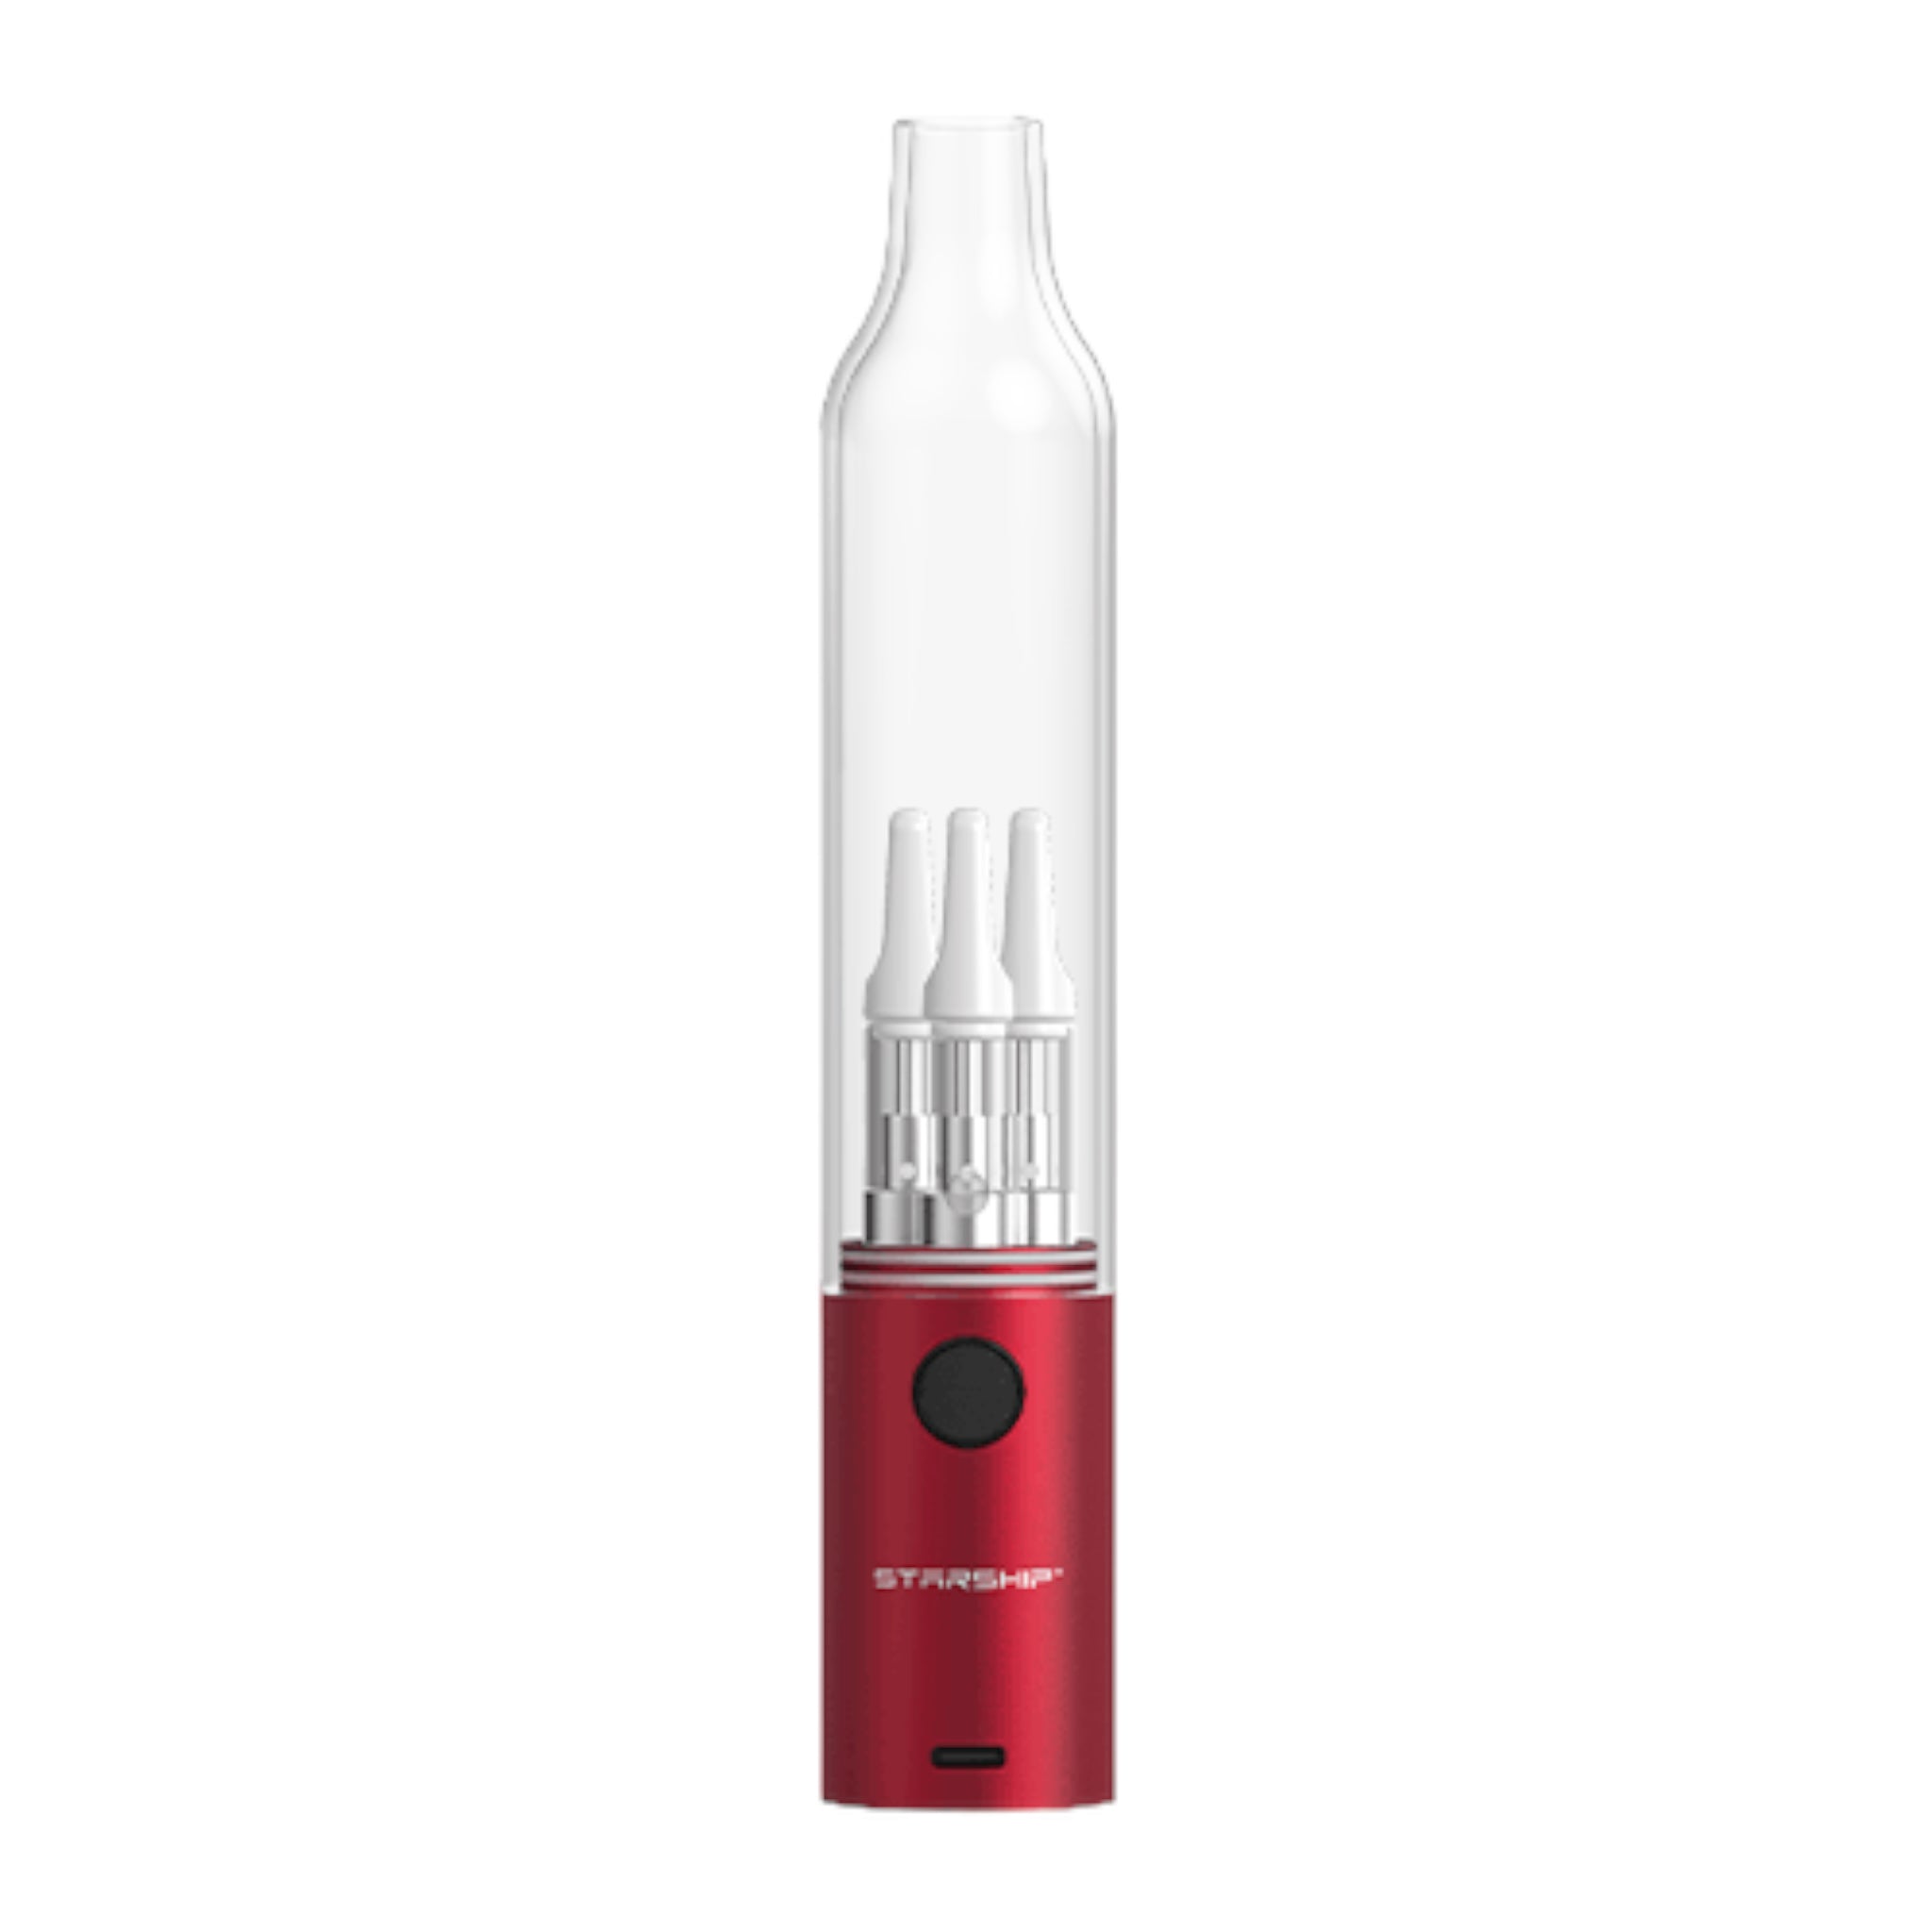 Hamilton Devices - Starship Triple Vape Cart And Wax Coil Battery - Red